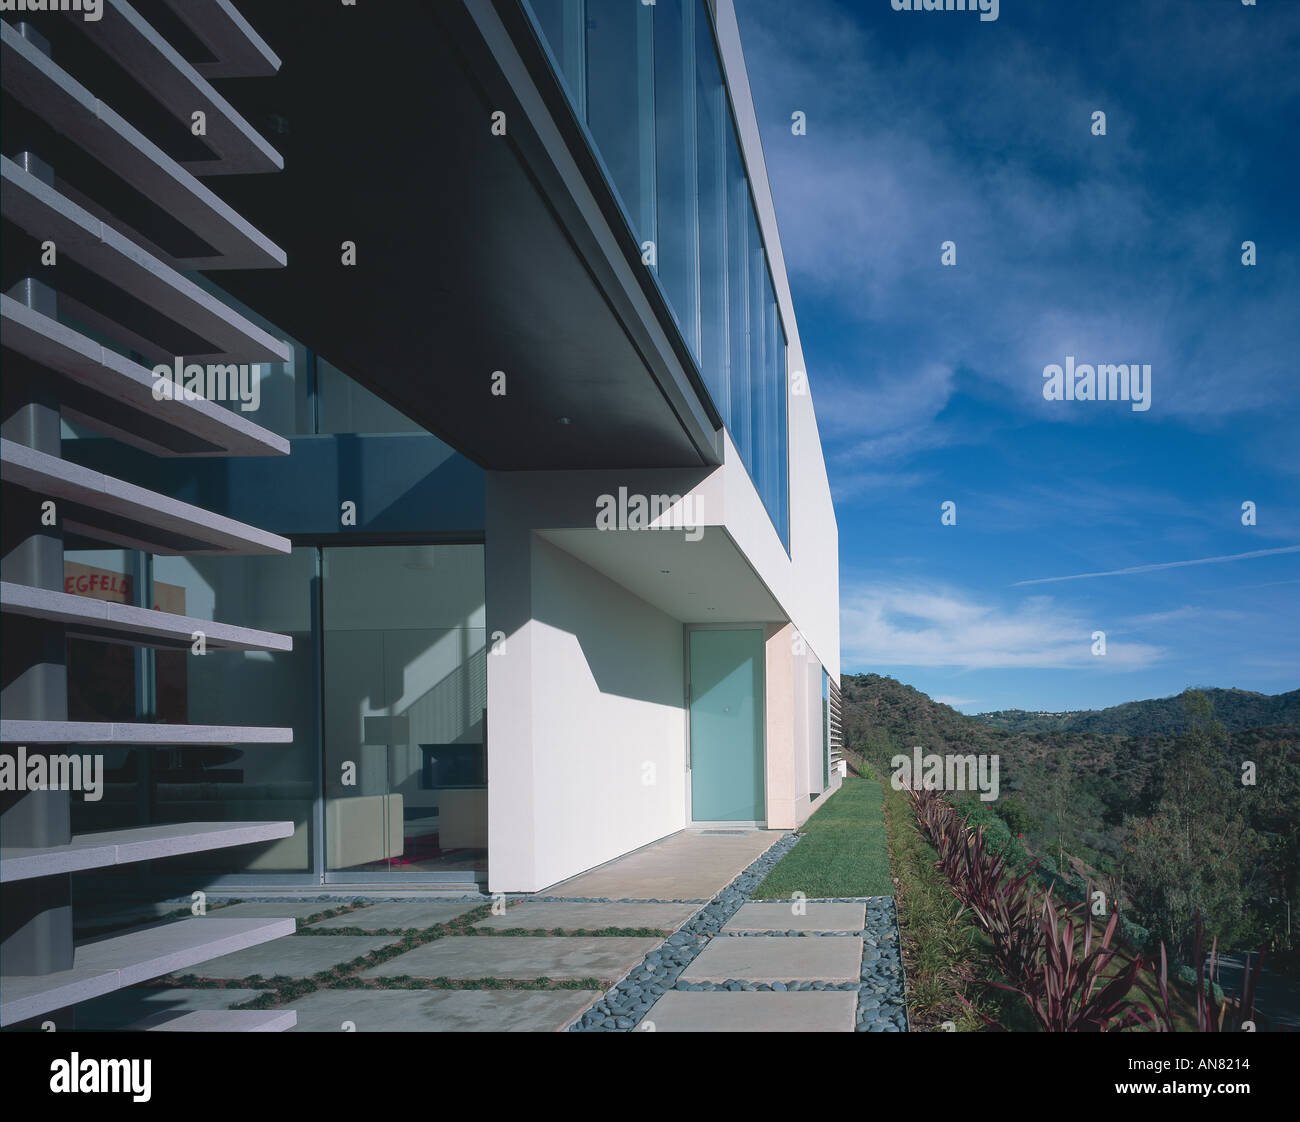 Oshry Residence, Bel Air, California. Exterior with footbridge. Architect: SPF Architects Stock Photo